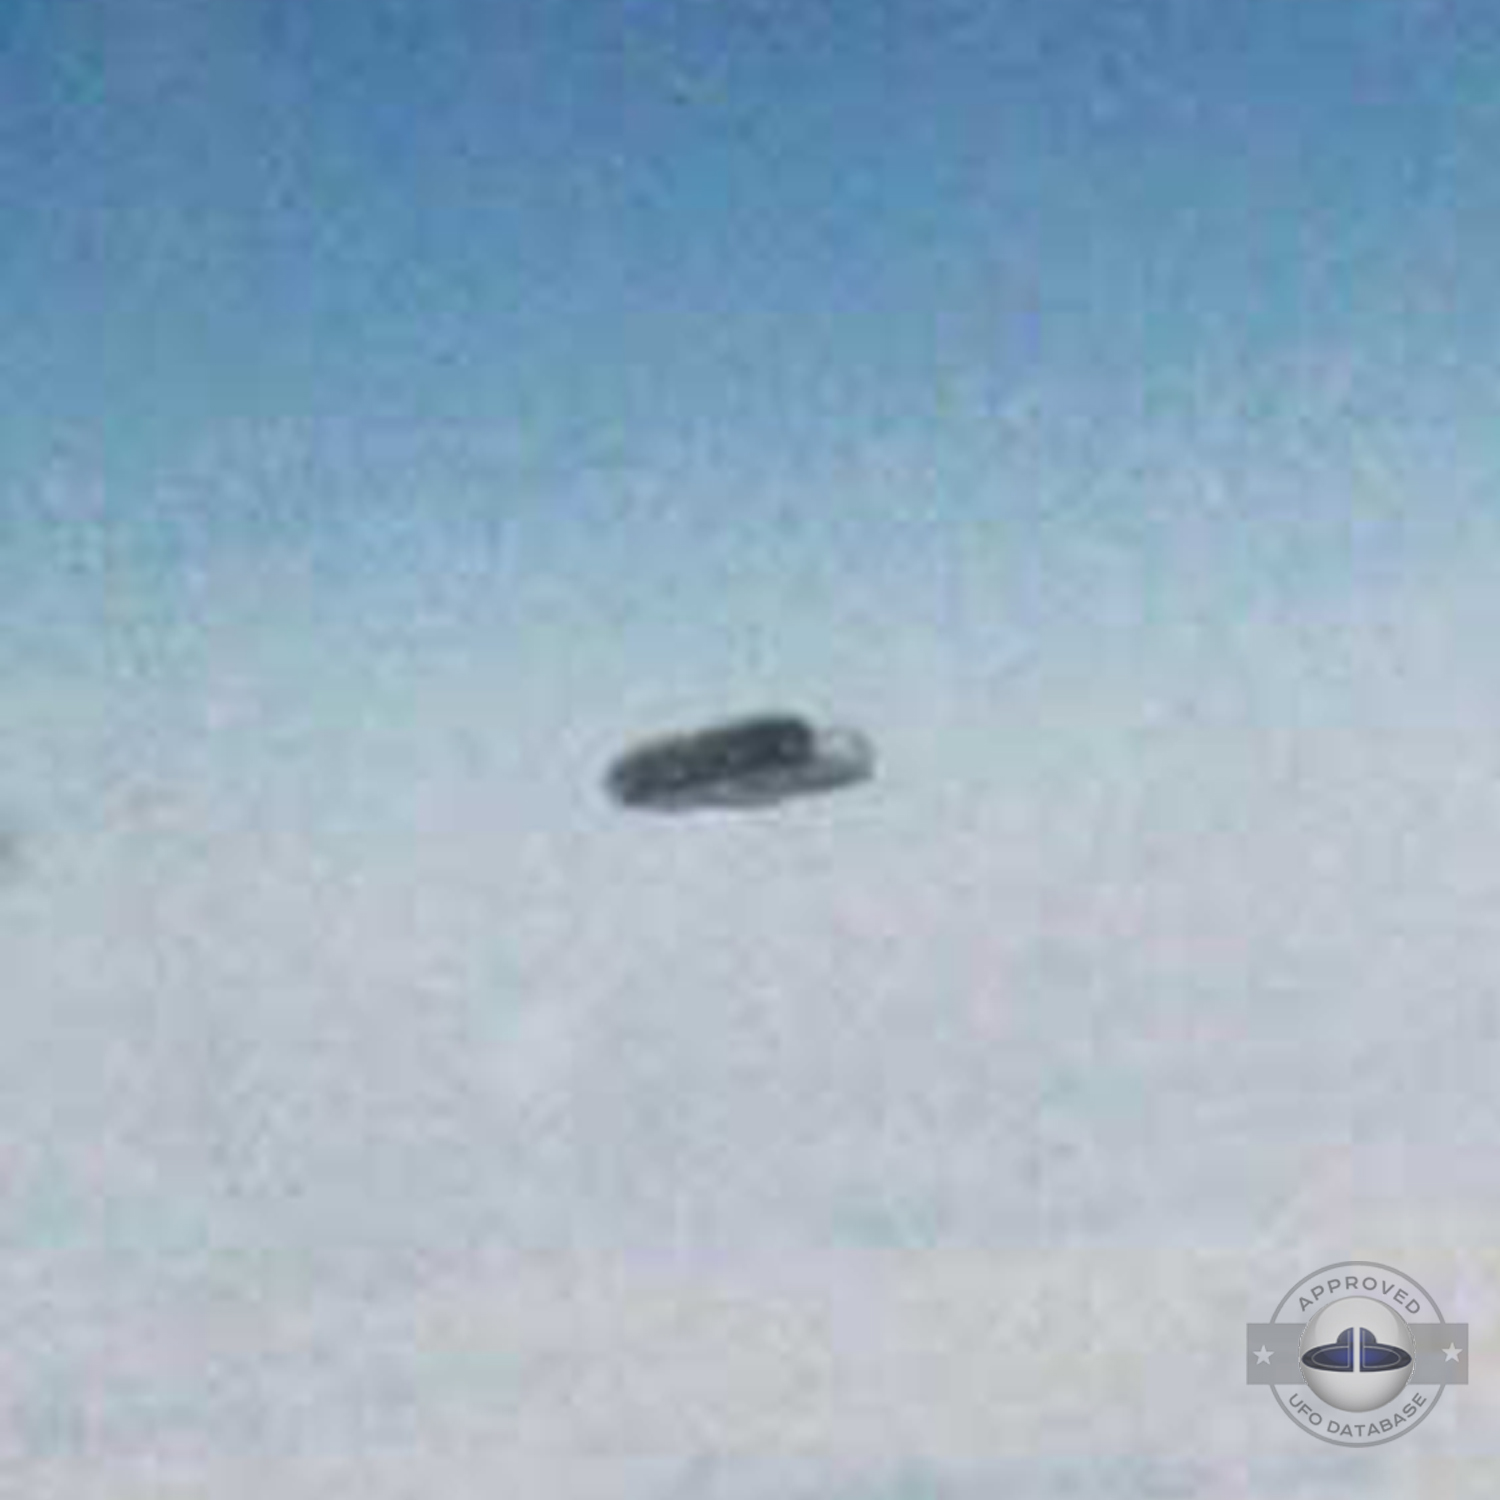 UFO picture Sighting from RyanAir airplane - Portugal UK - May 2010 UFO Picture #93-4